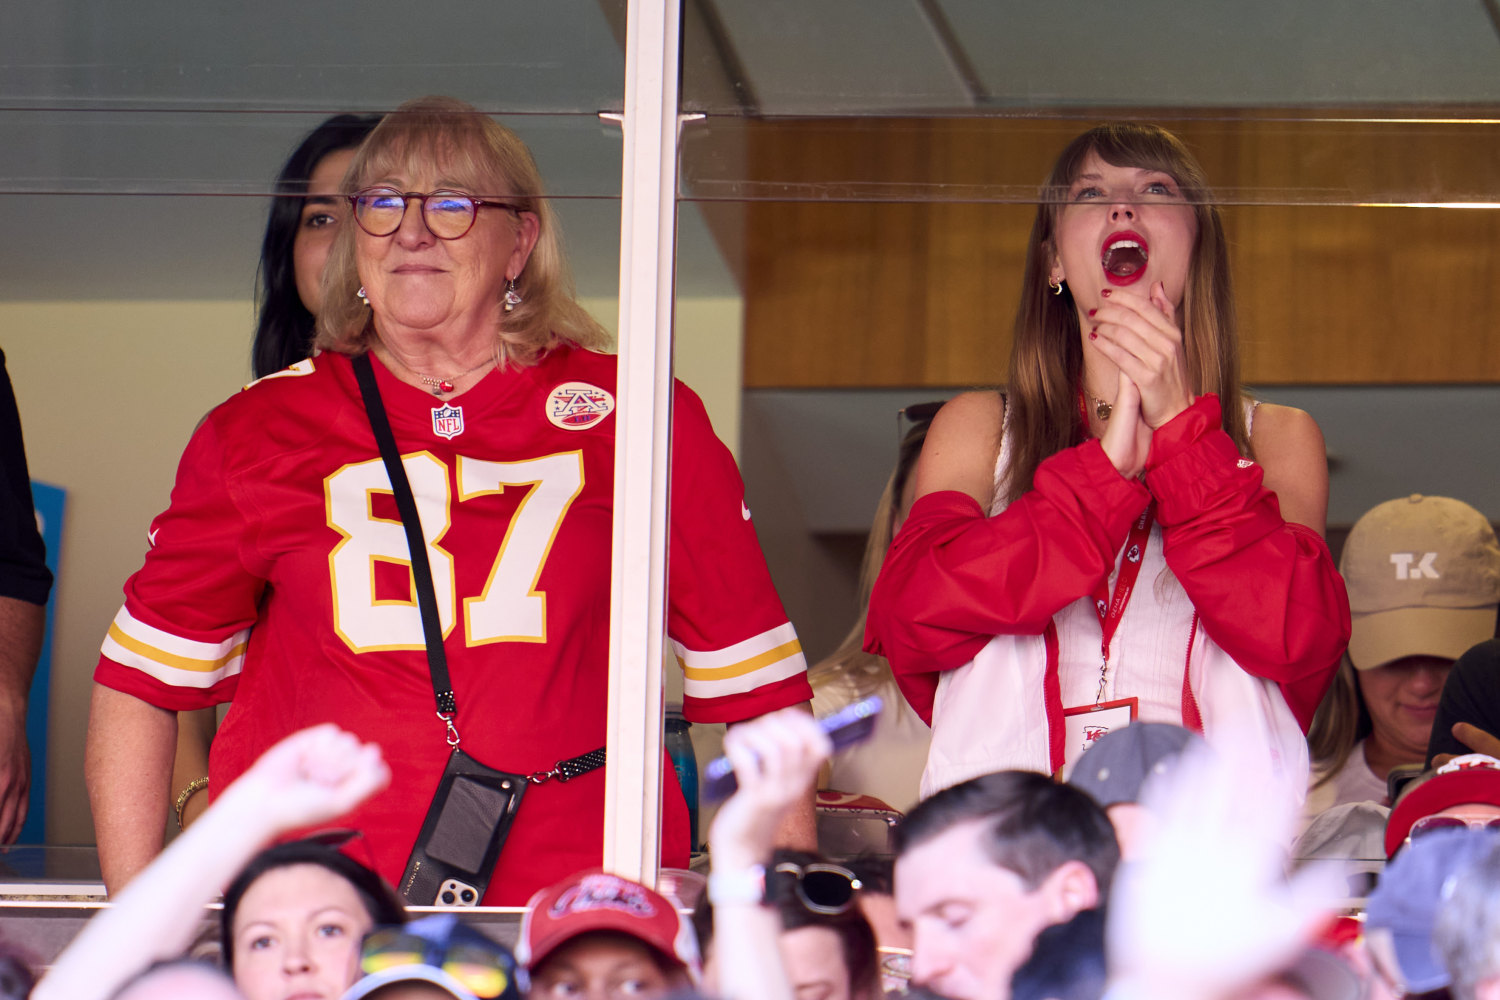 Taylor Swift and Travis Kelce 'Hanging Out' with 'No Pressure' : r